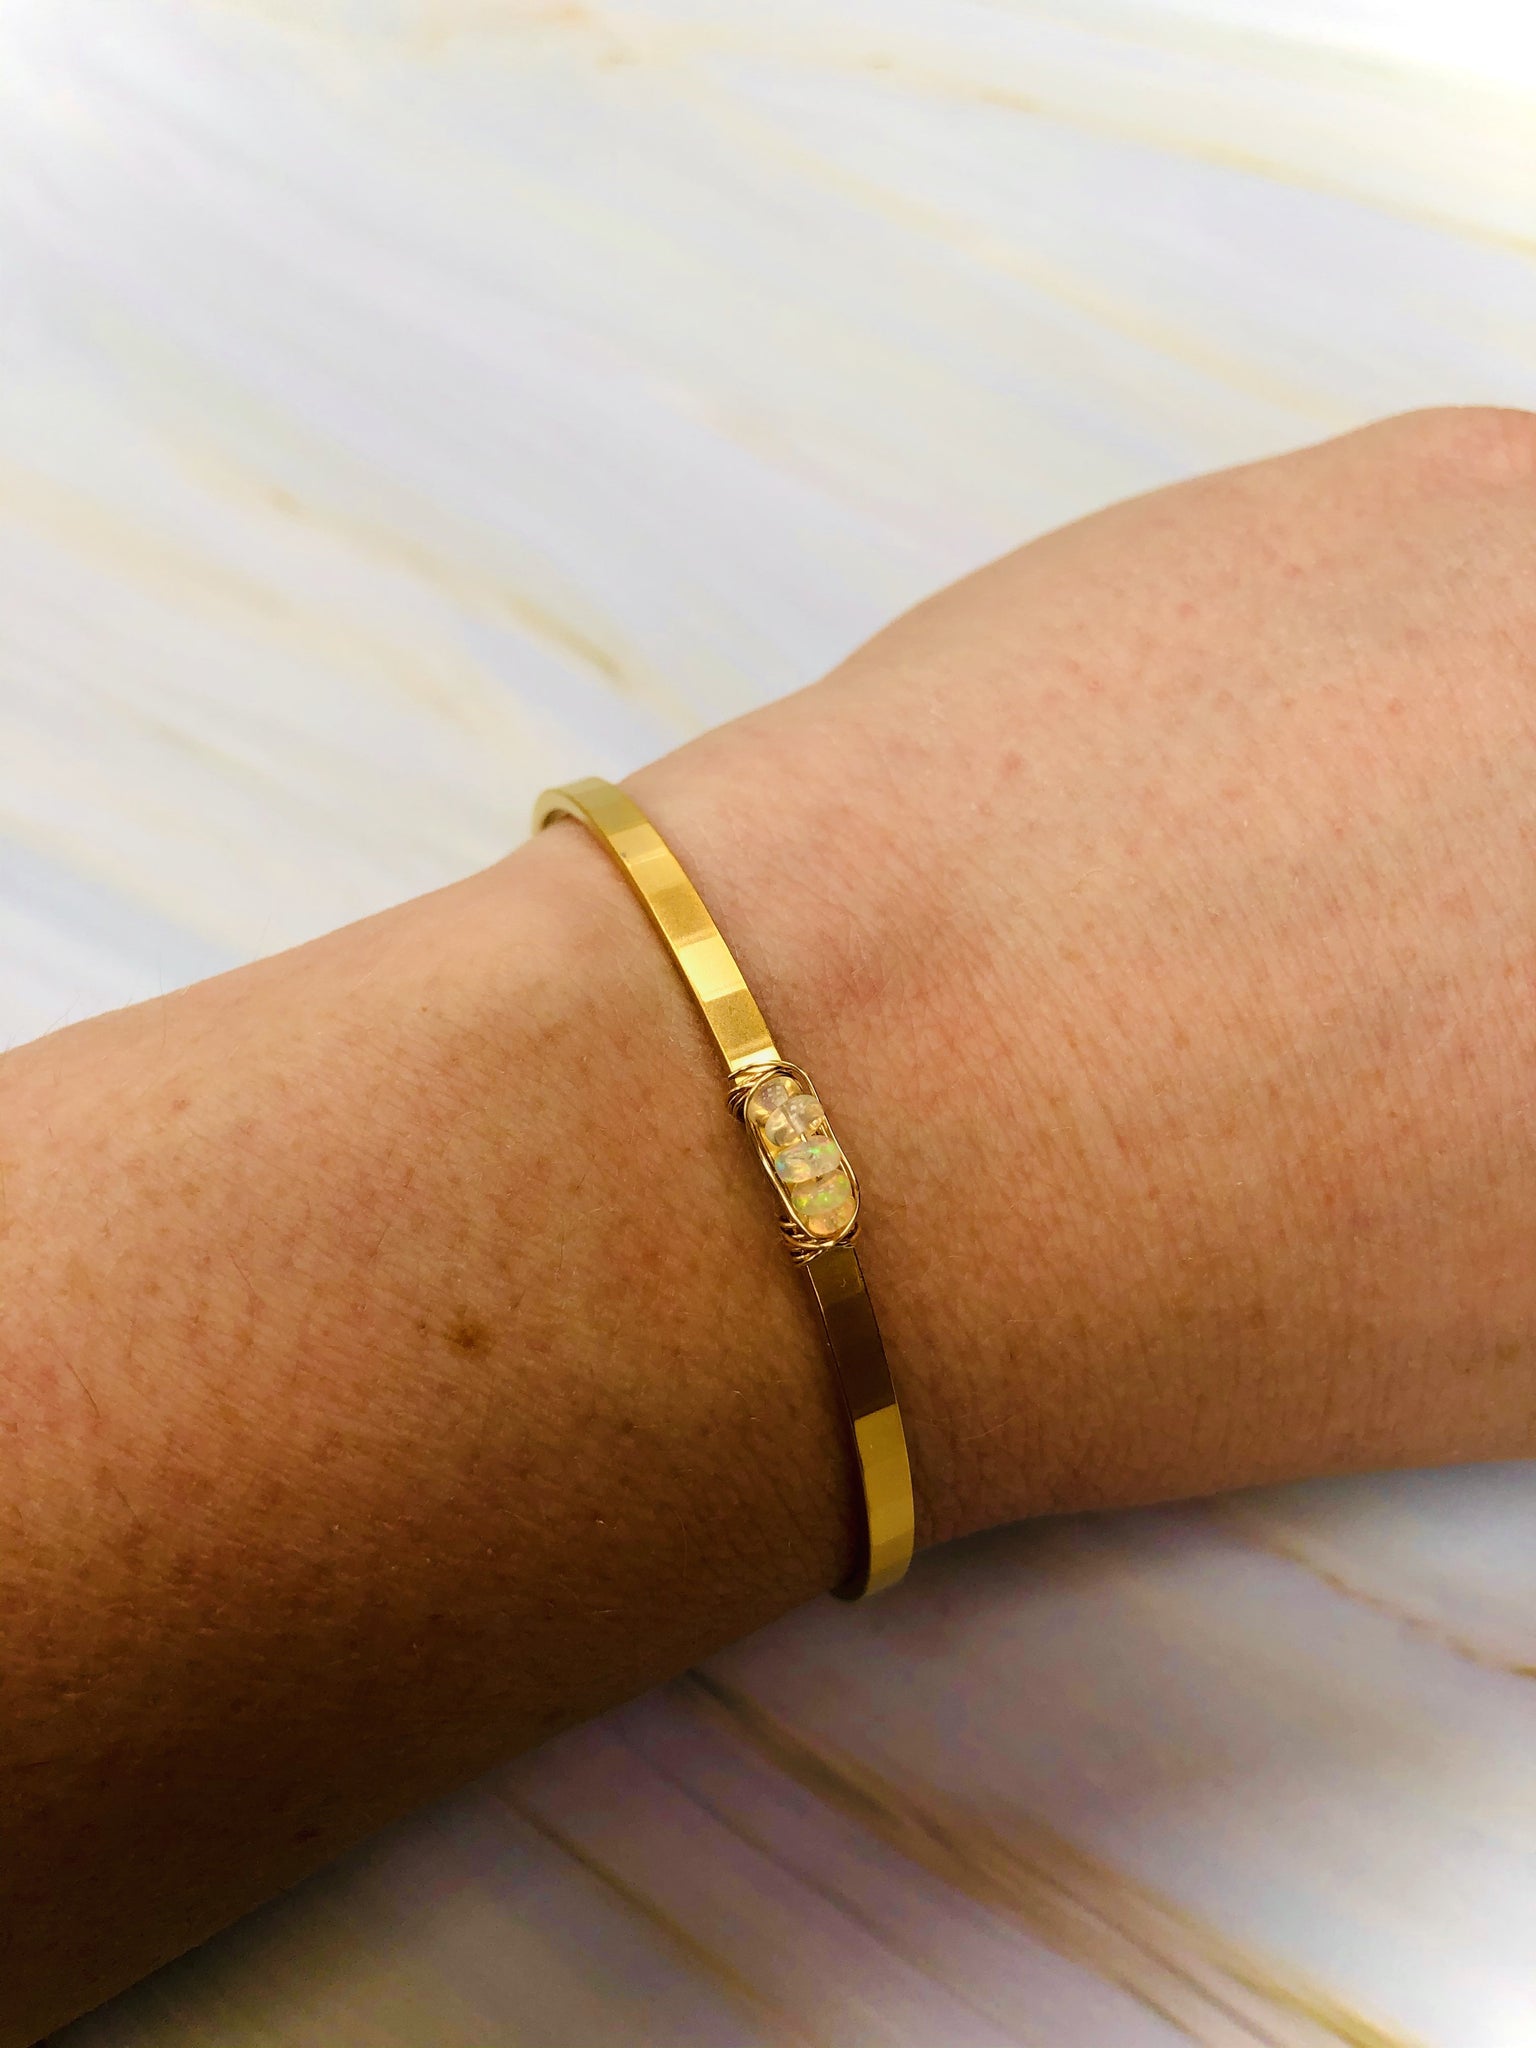 Wholesale HOVANCI 18K Real Gold Silver Plated Big Circle Round Bangle Open  Cuff Adjustable Plain Matte Gold Bracelet From malibabacom